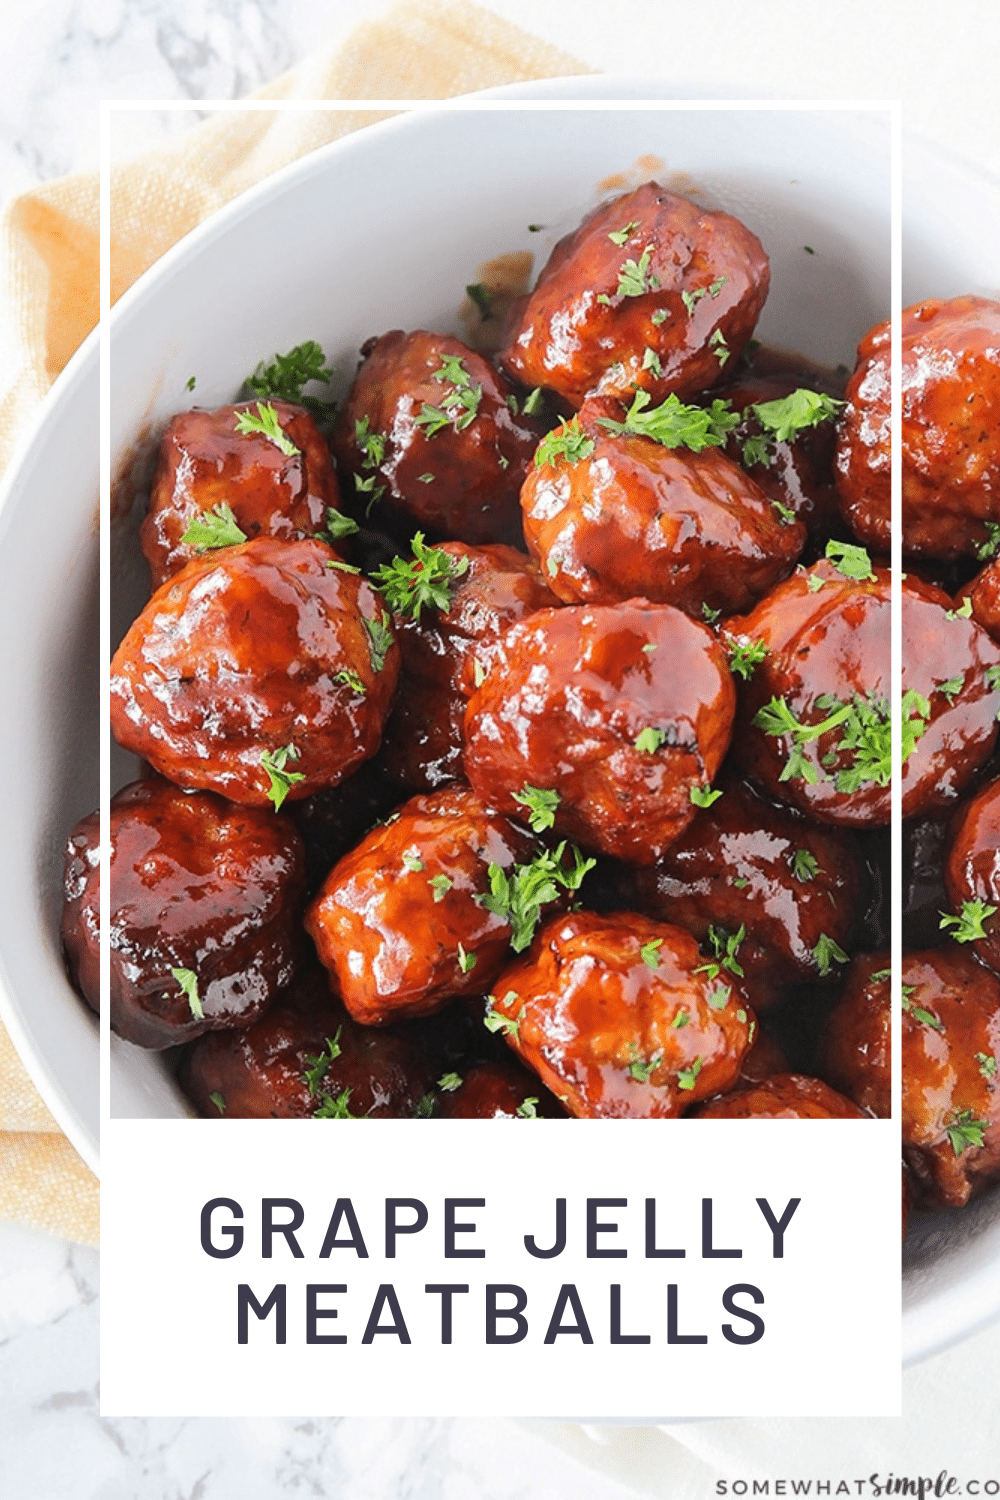 Crock Pot Grape Jelly Meatballs (3 Ingredients) | Somewhat Simple